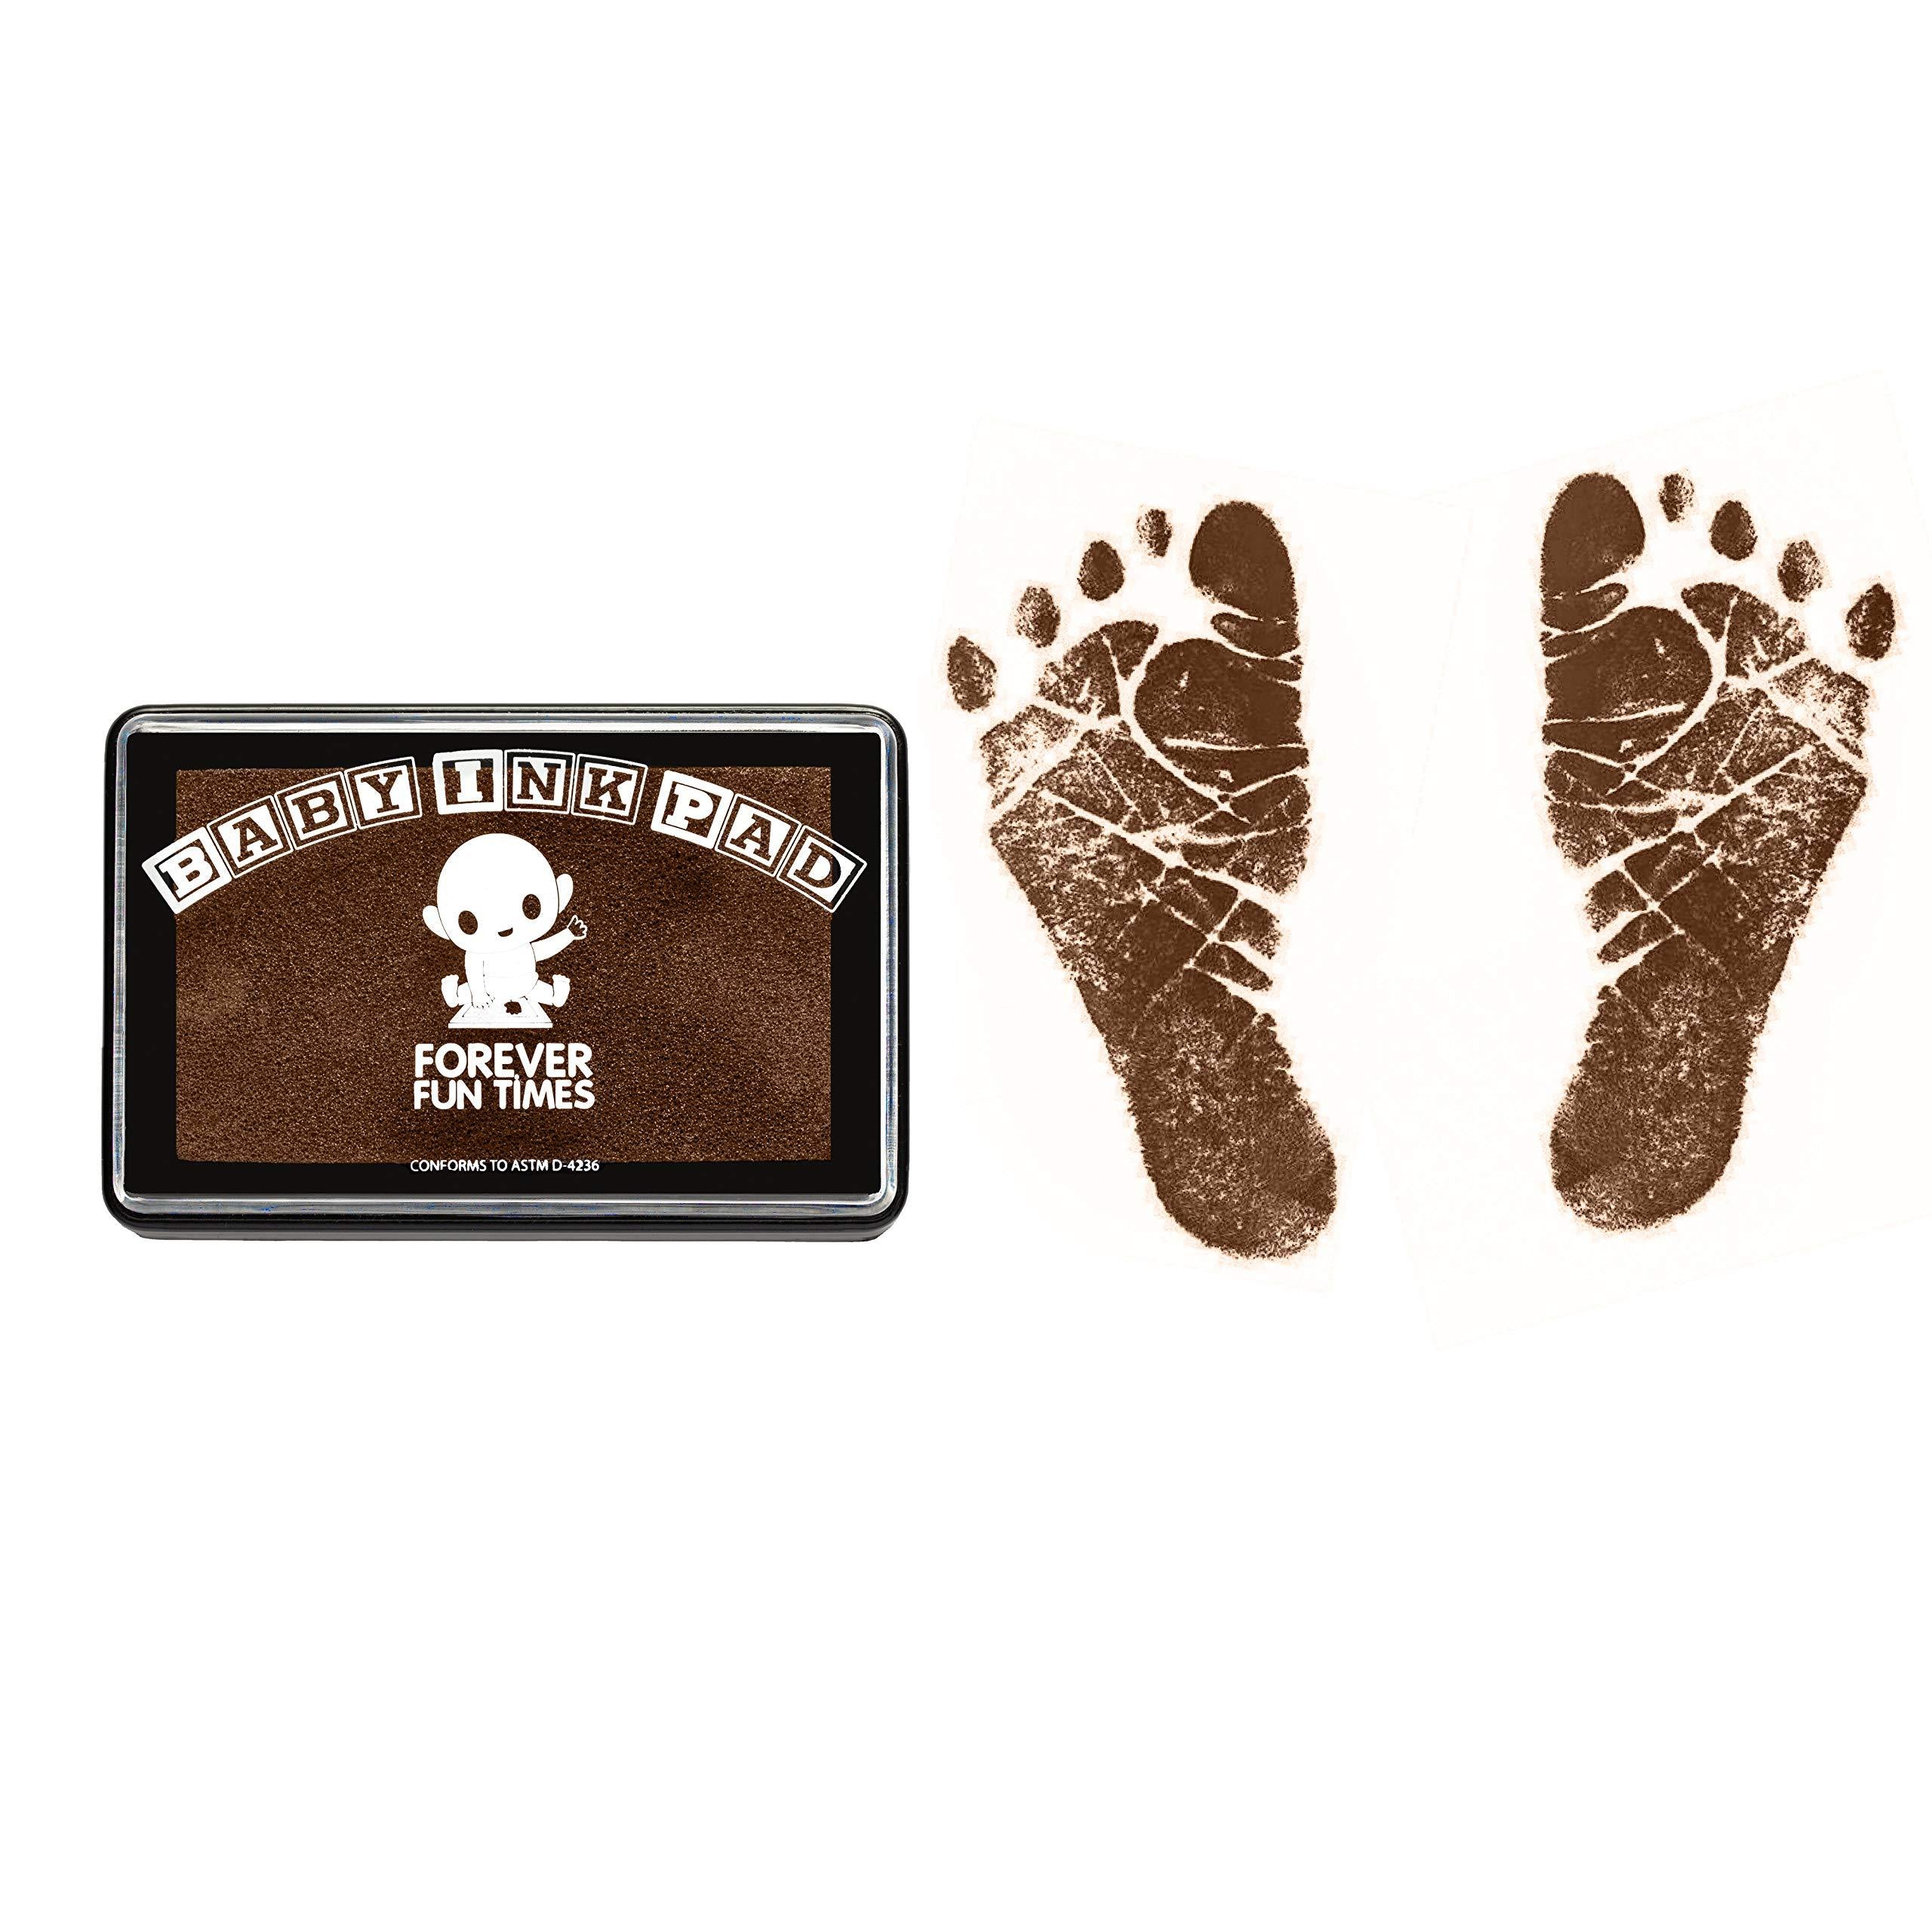 Baby Hand and Foot Print Kit